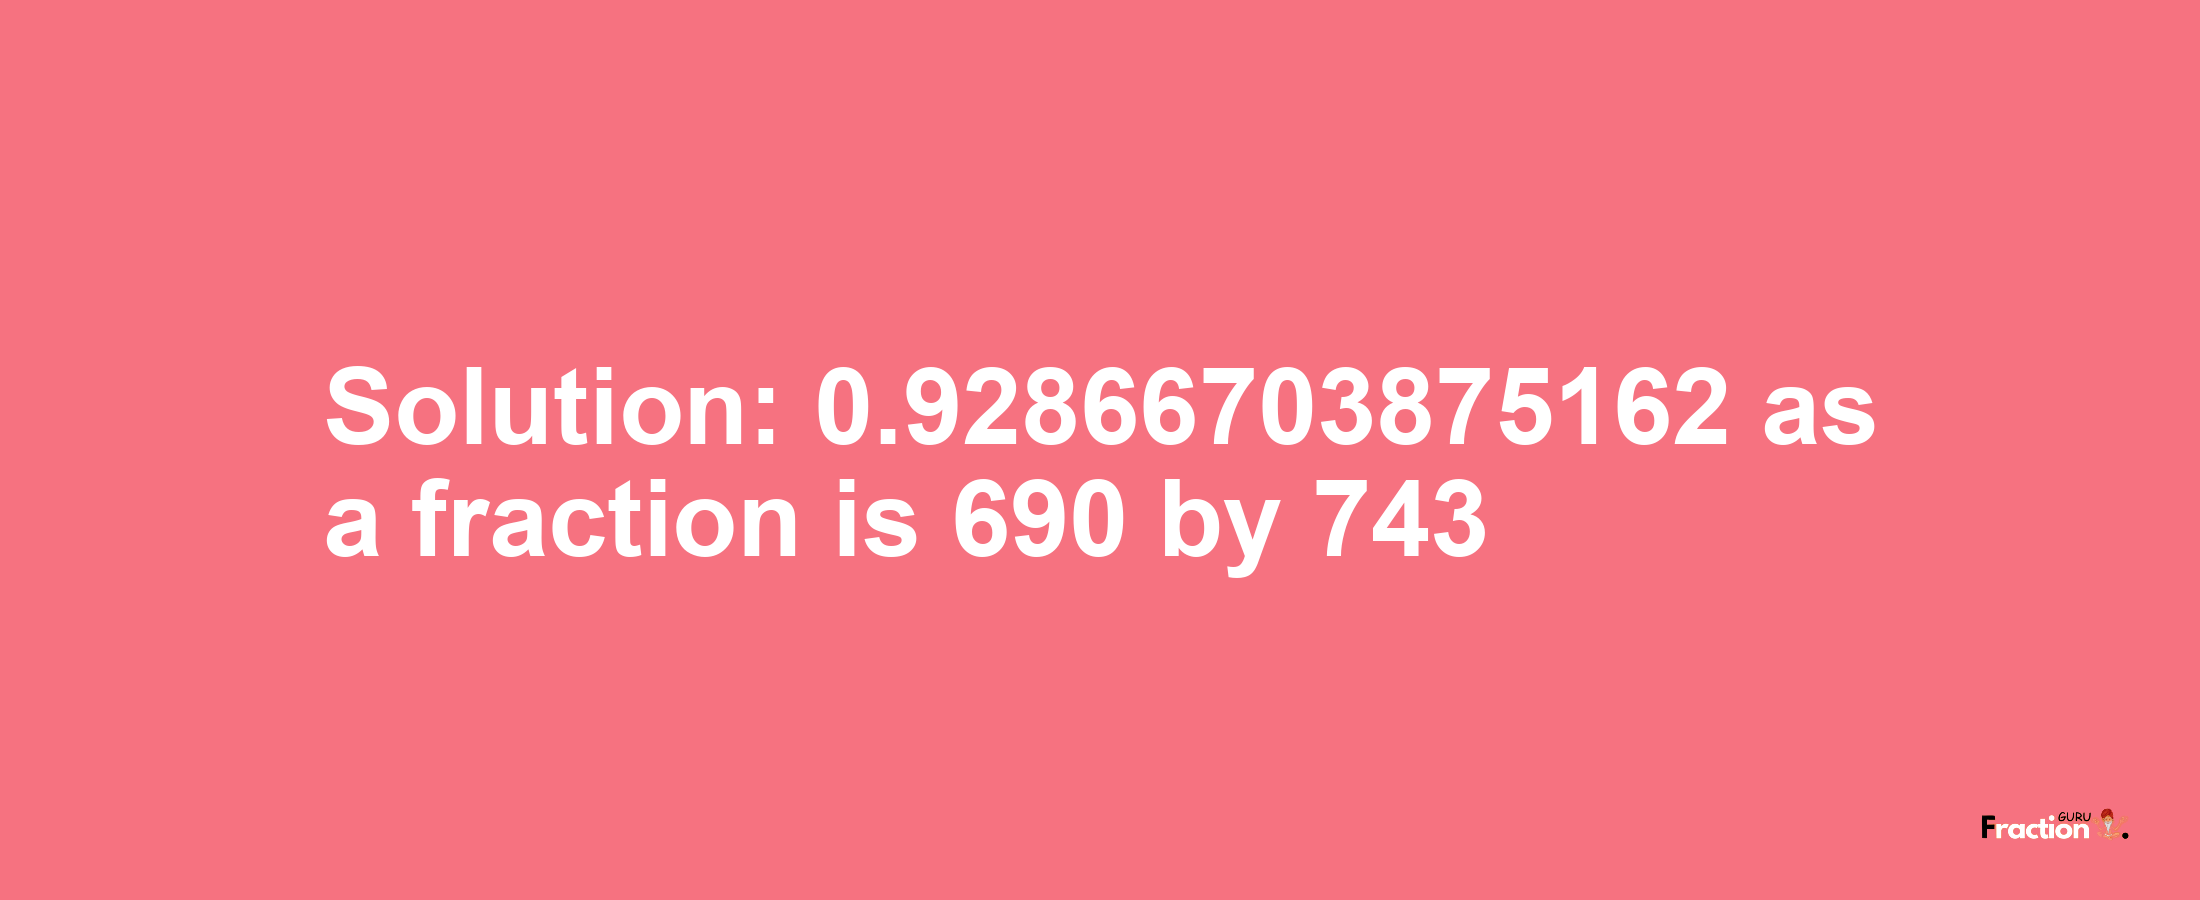 Solution:0.92866703875162 as a fraction is 690/743